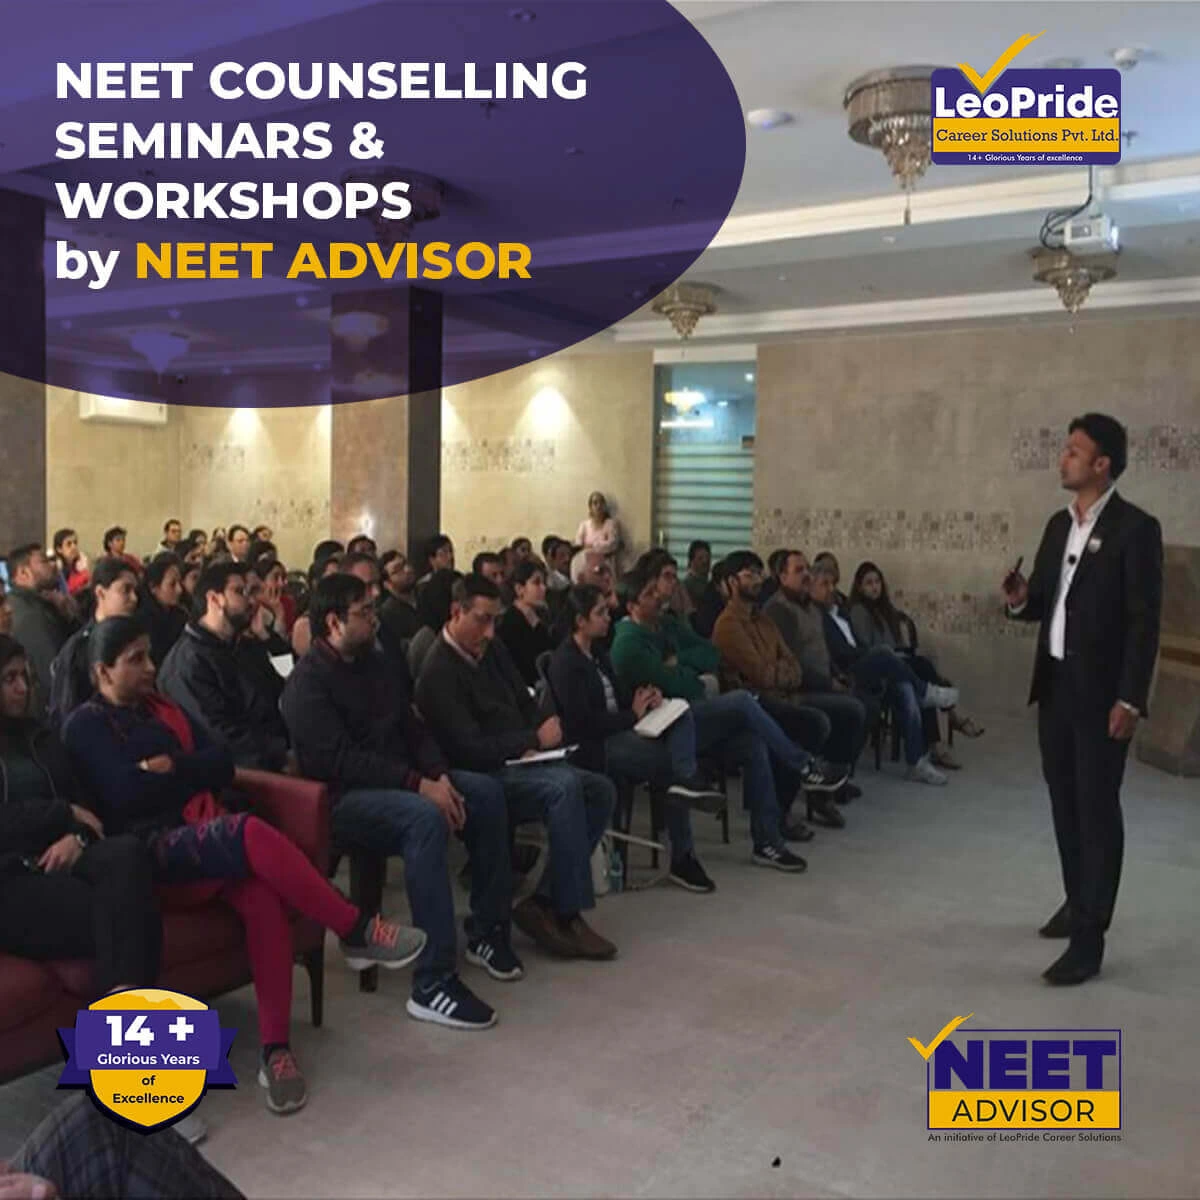 NEET COUNSELLING: Seminars and Workshops by NEET ADVISOR